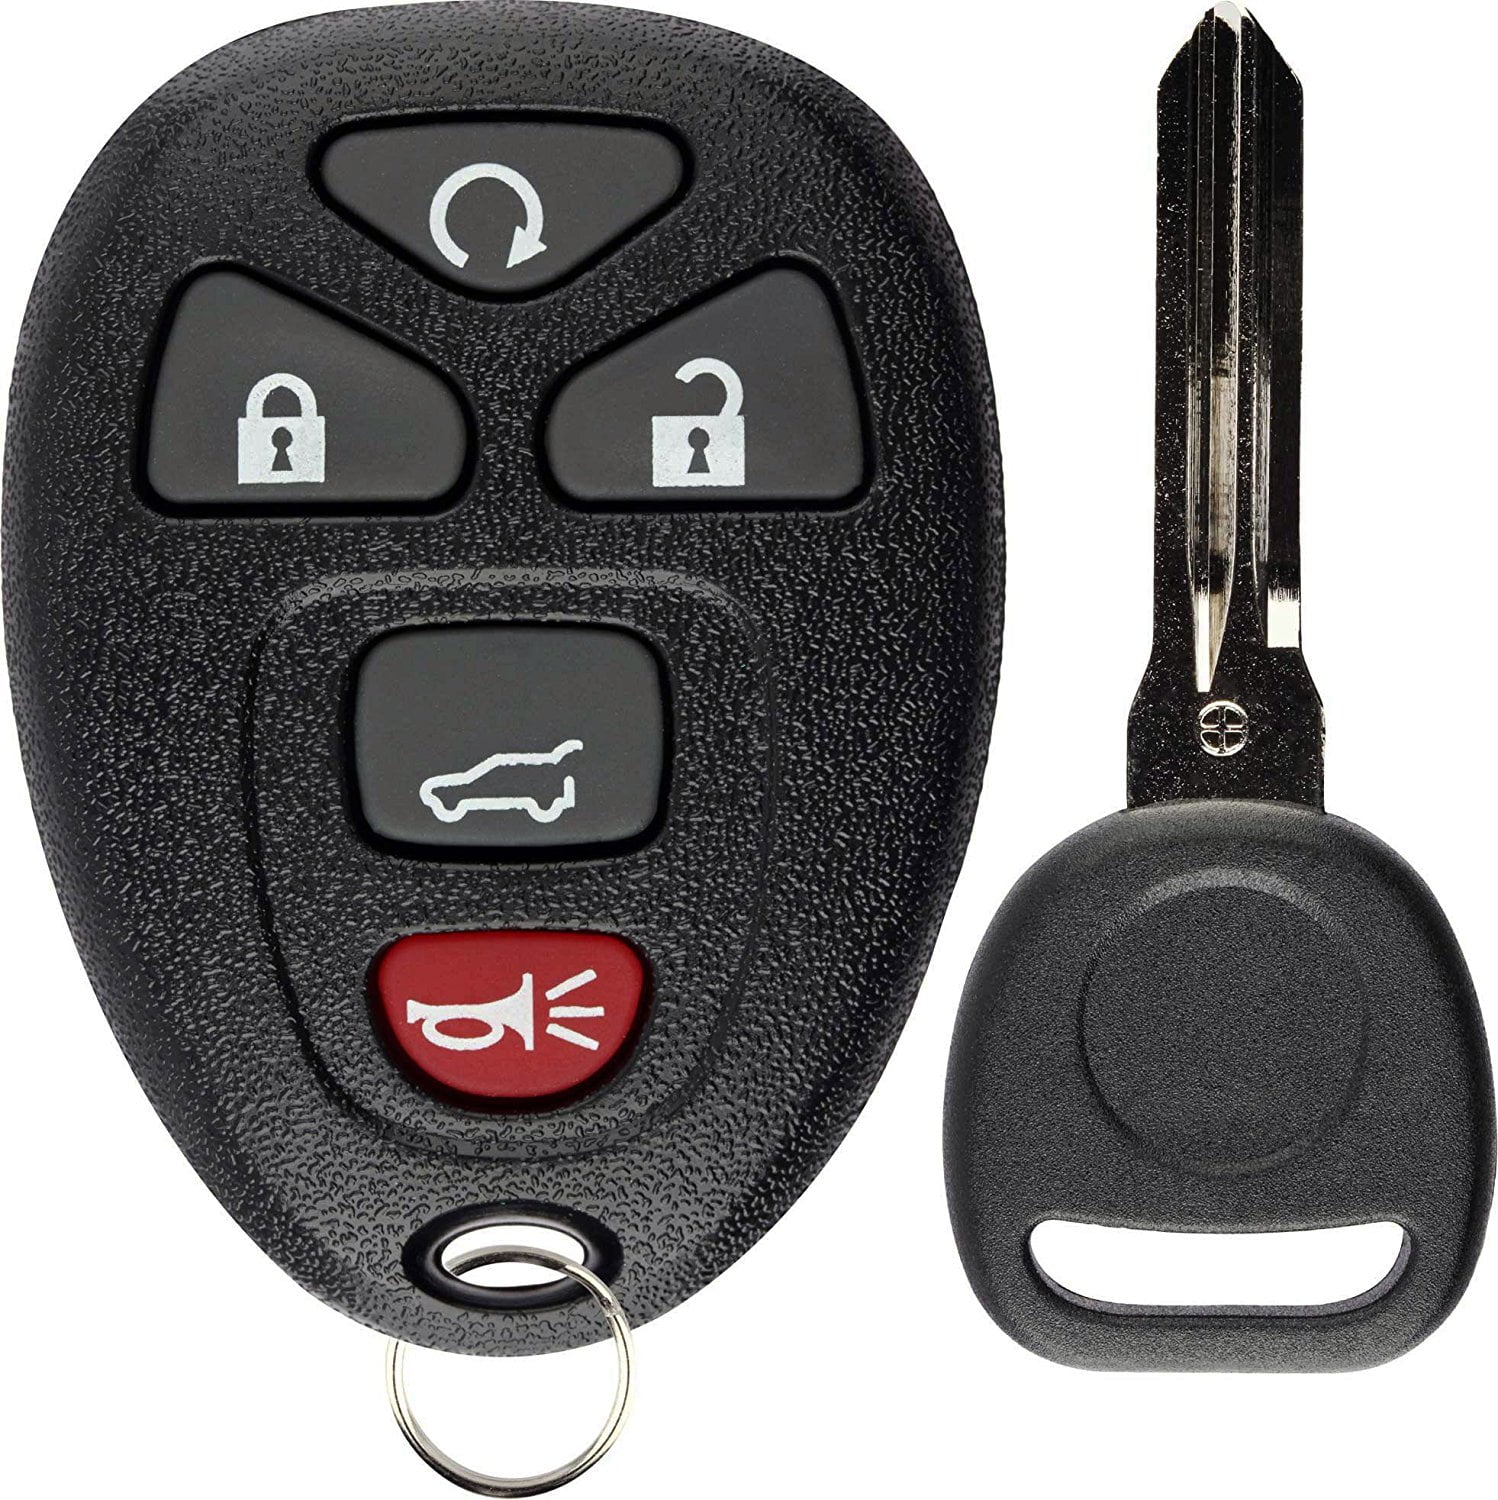 Details about   Replacement Keyless Entry Remote Fob & Ignition Chip Key For Ford Licoln Mercury